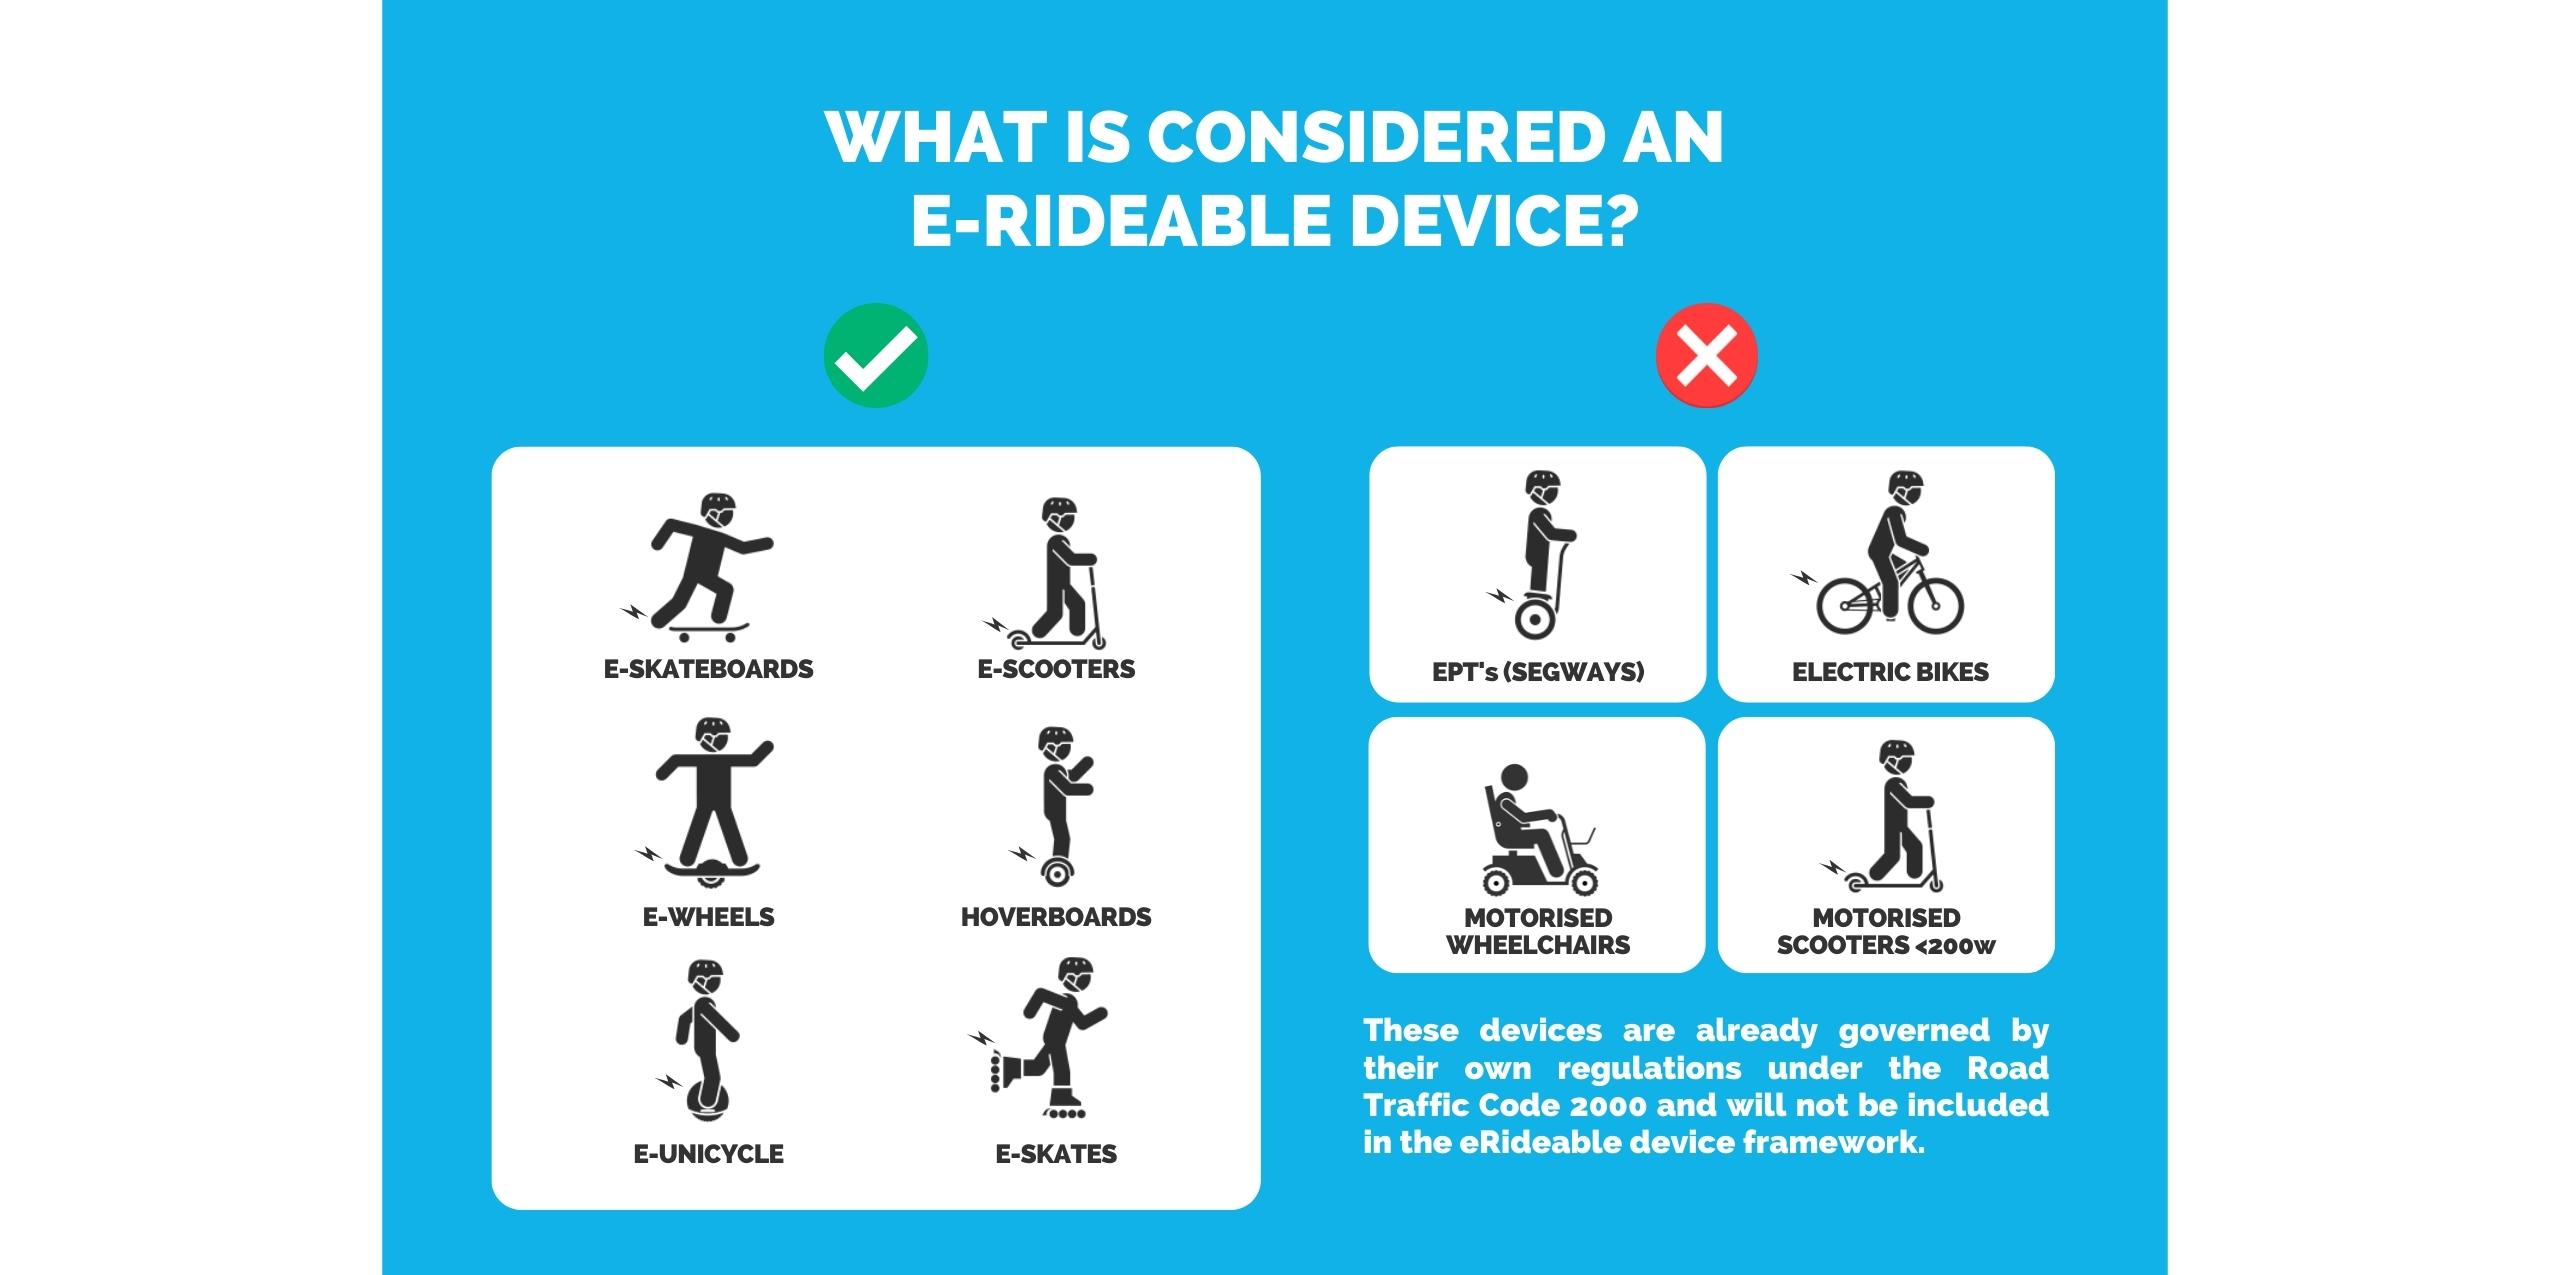 skateboards, escooters, and e-skates are erideables, while an ebike is not.